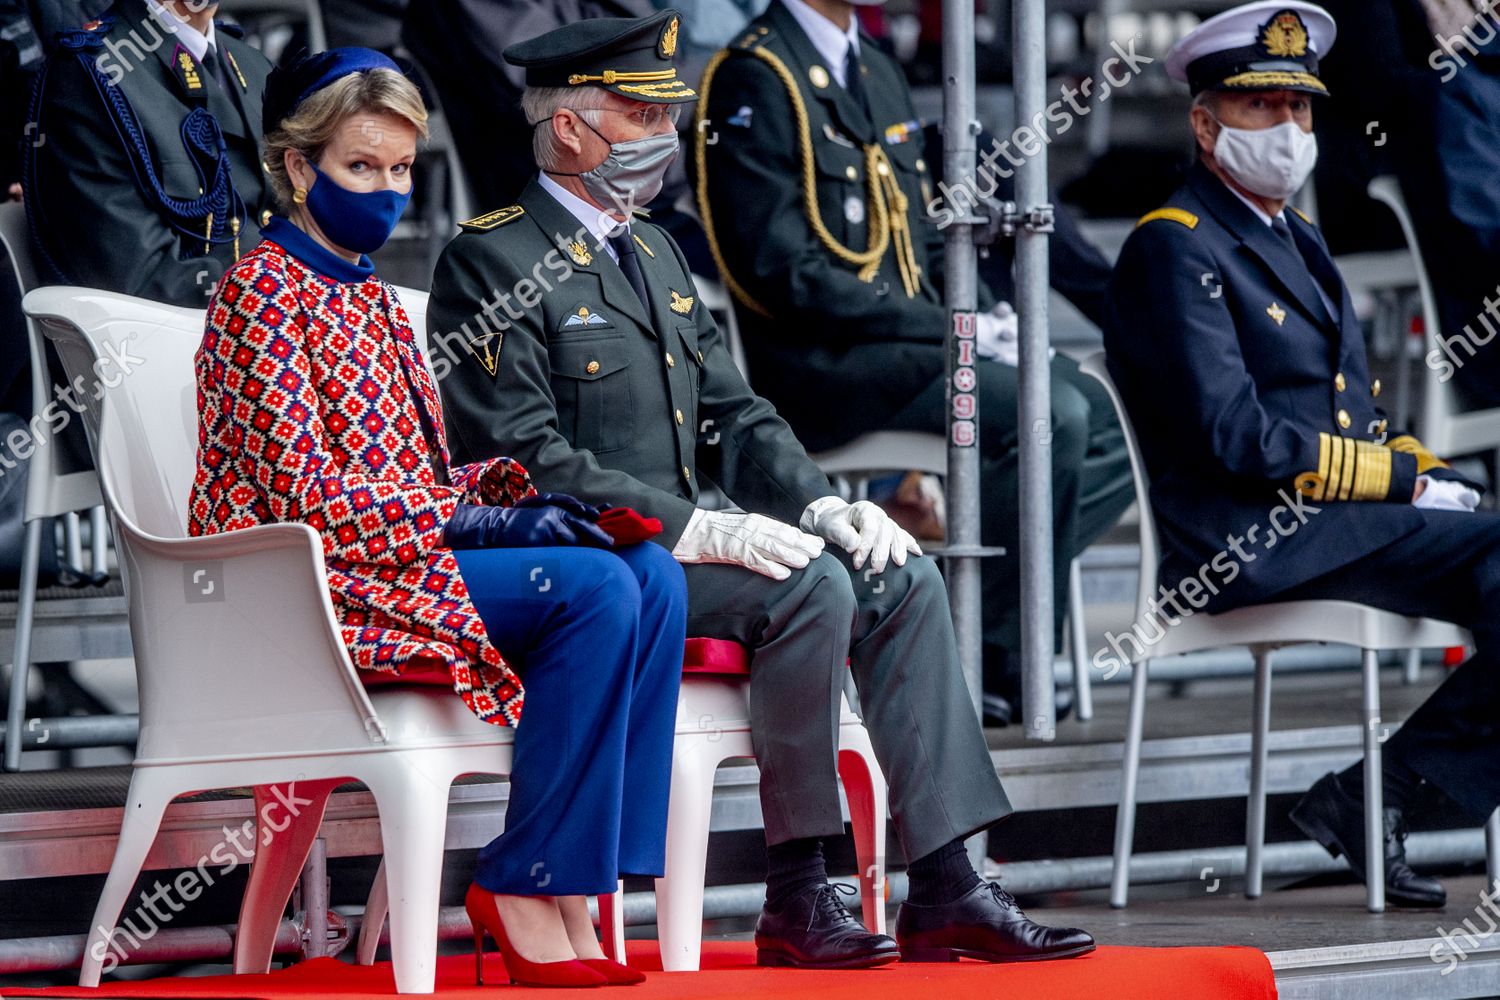 CASA REAL BELGA - Página 27 Belgian-royals-attend-ceremony-for-the-presentation-of-the-blue-berets-royal-military-academy-erm-brussels-belgium-shutterstock-editorial-10790505s